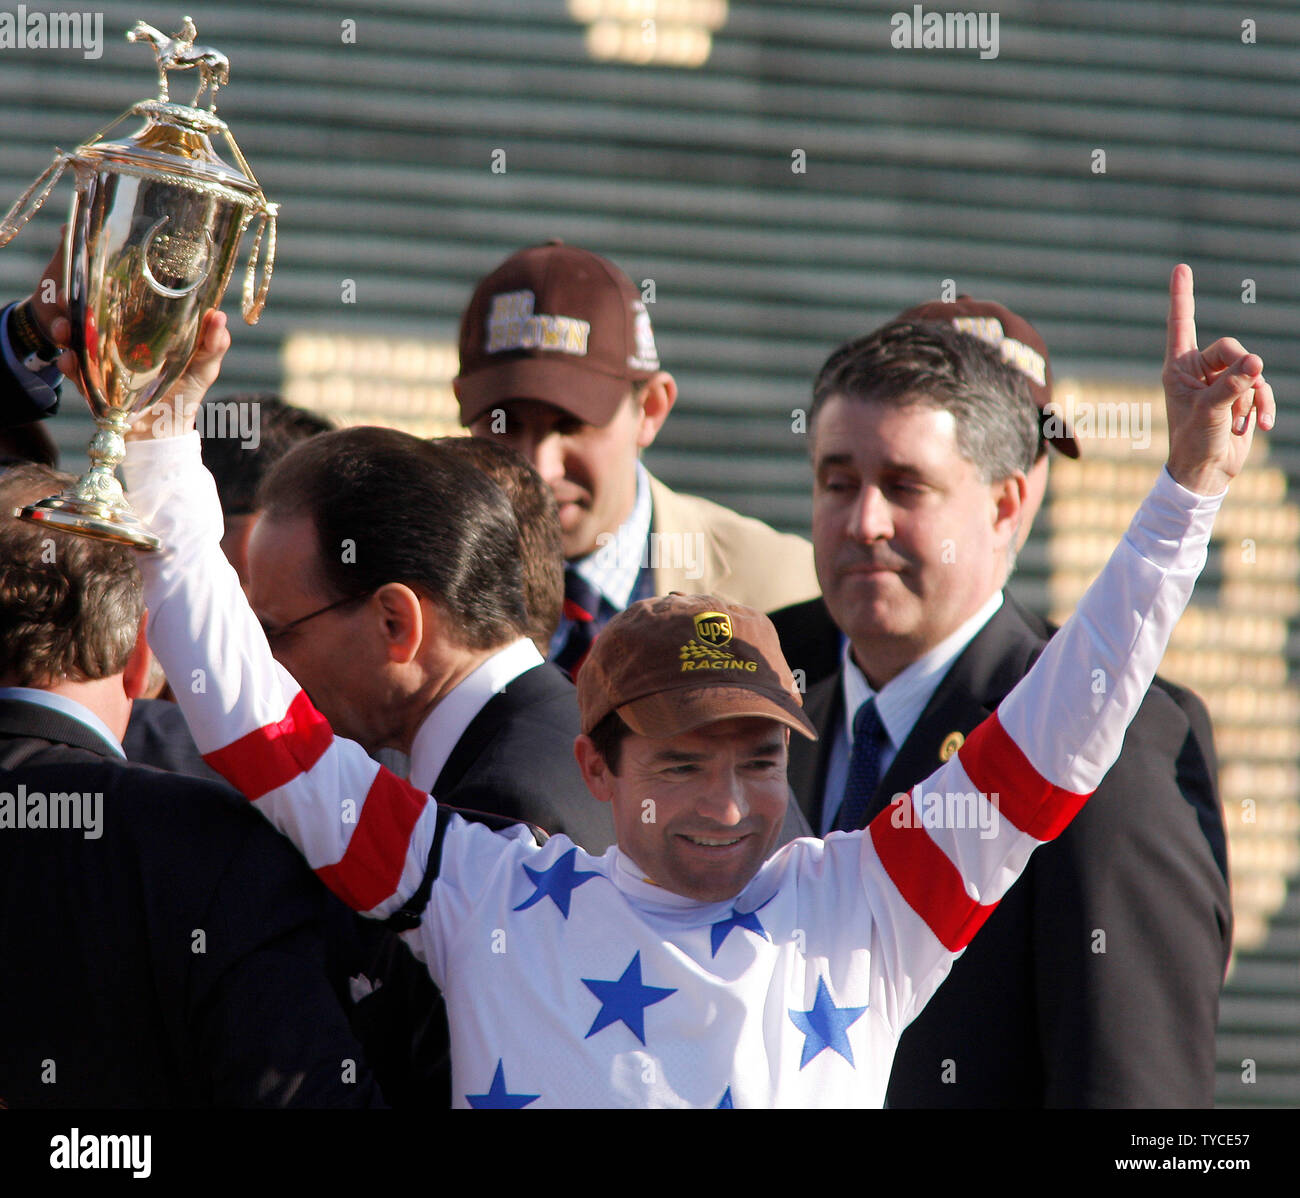 Kent Desormeaux, jockey for Big Brown, celebrates winning the 134th running of the Kentucky Derby at Churchill Downs on May 3, 2008 in Louisville, Kentucky. (UPI Photo/Frank Polich) Stock Photo